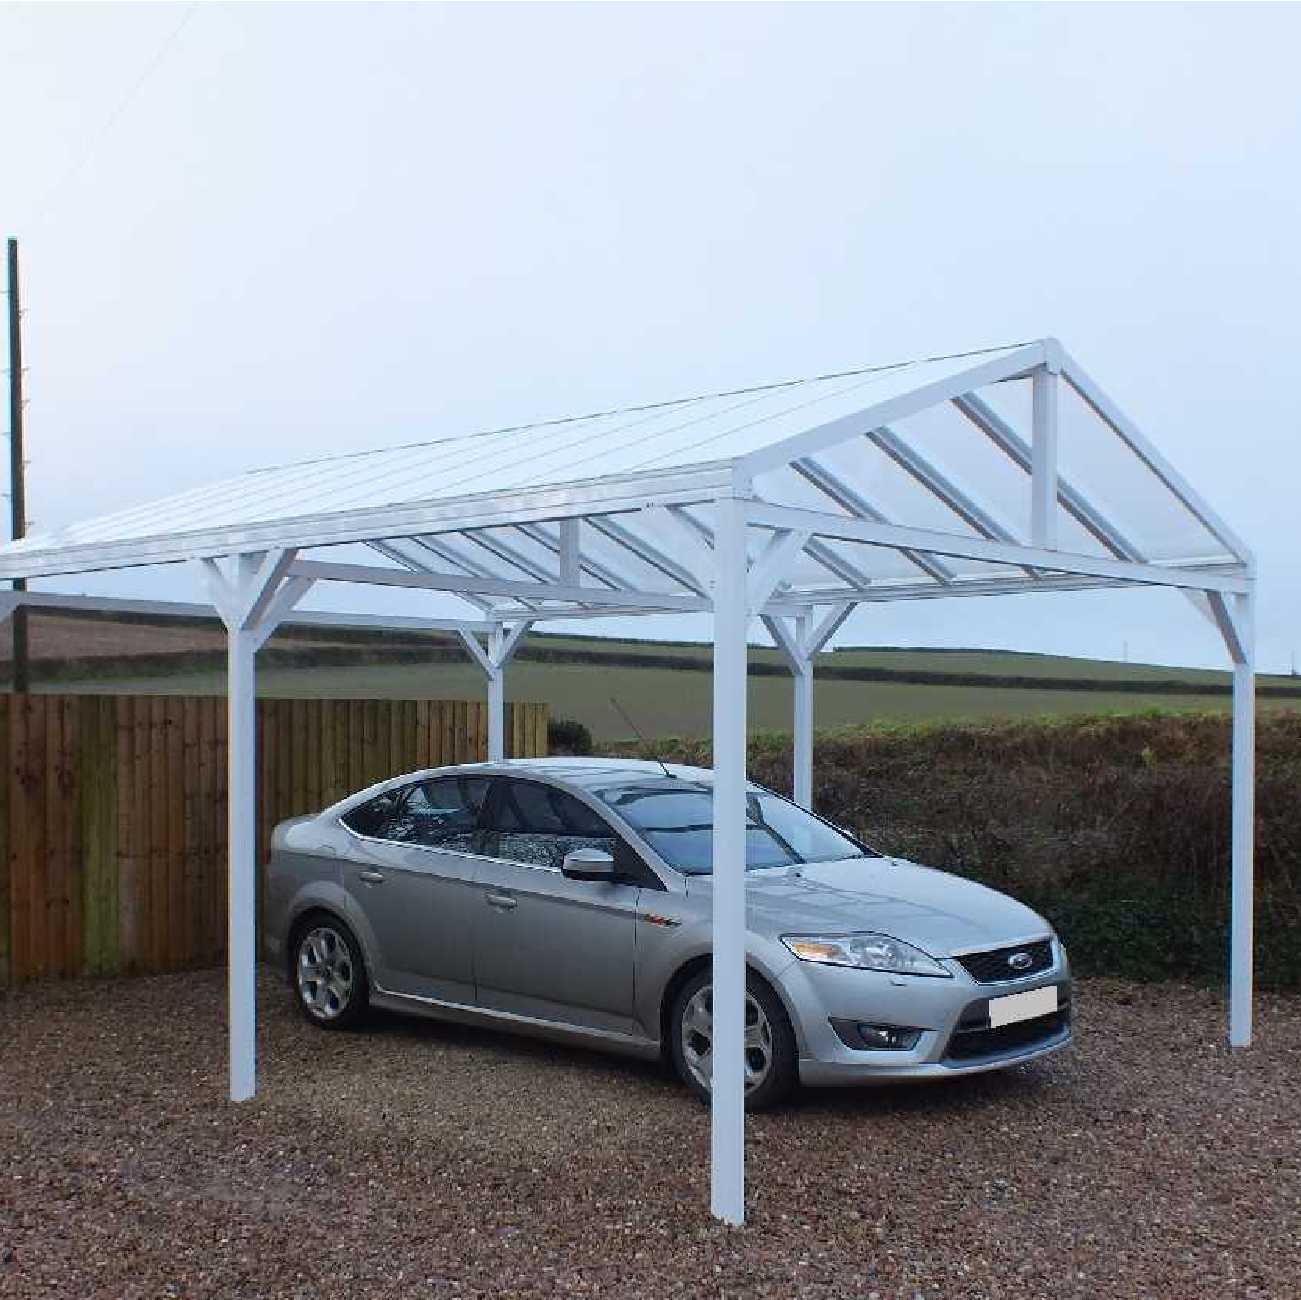 Affordable Omega Smart Free-Standing, White Gable-Roof (type 1) Canopy with 16mm Polycarbonate Glazing - 5.2m (W) x 4.0m (P), (6) Supporting Posts